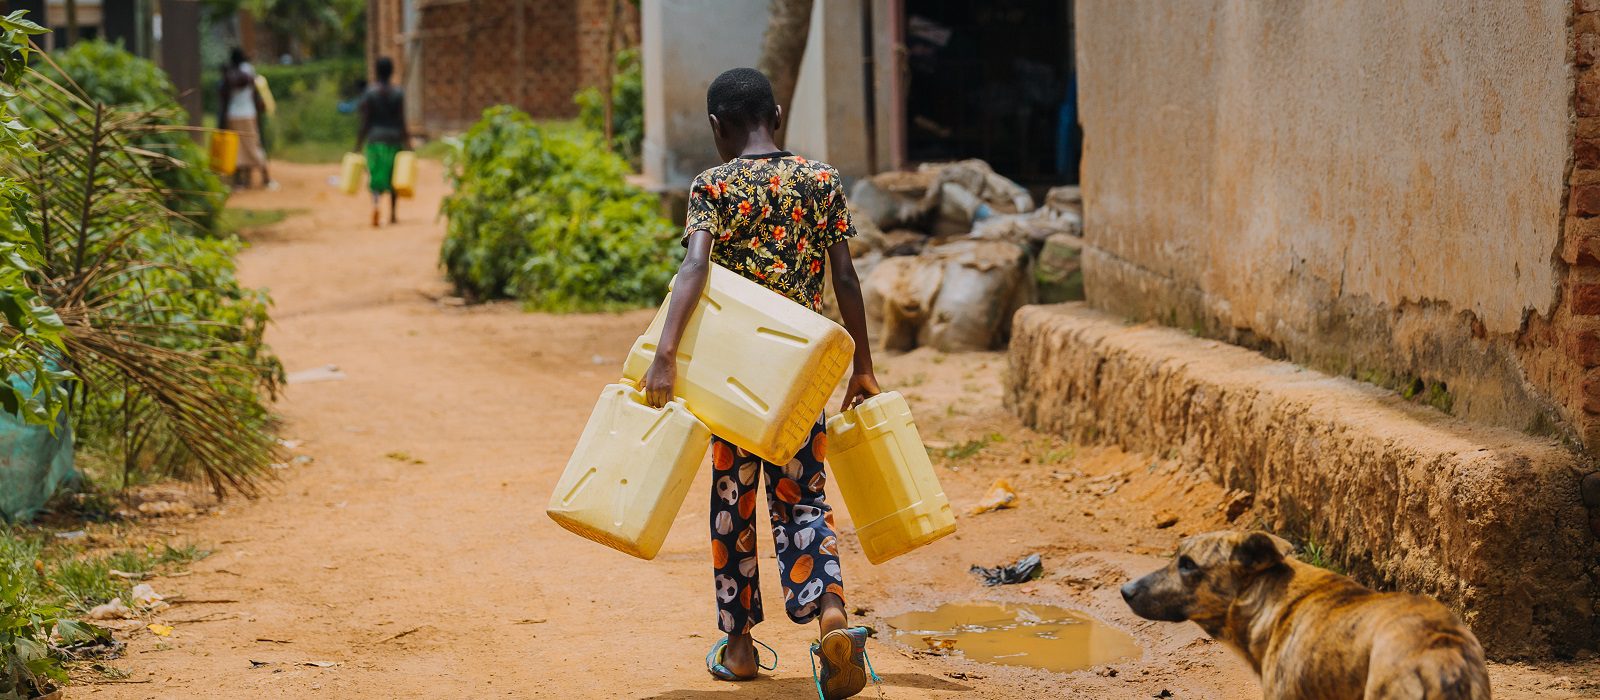 Child carrying water can in Uganda, Africa